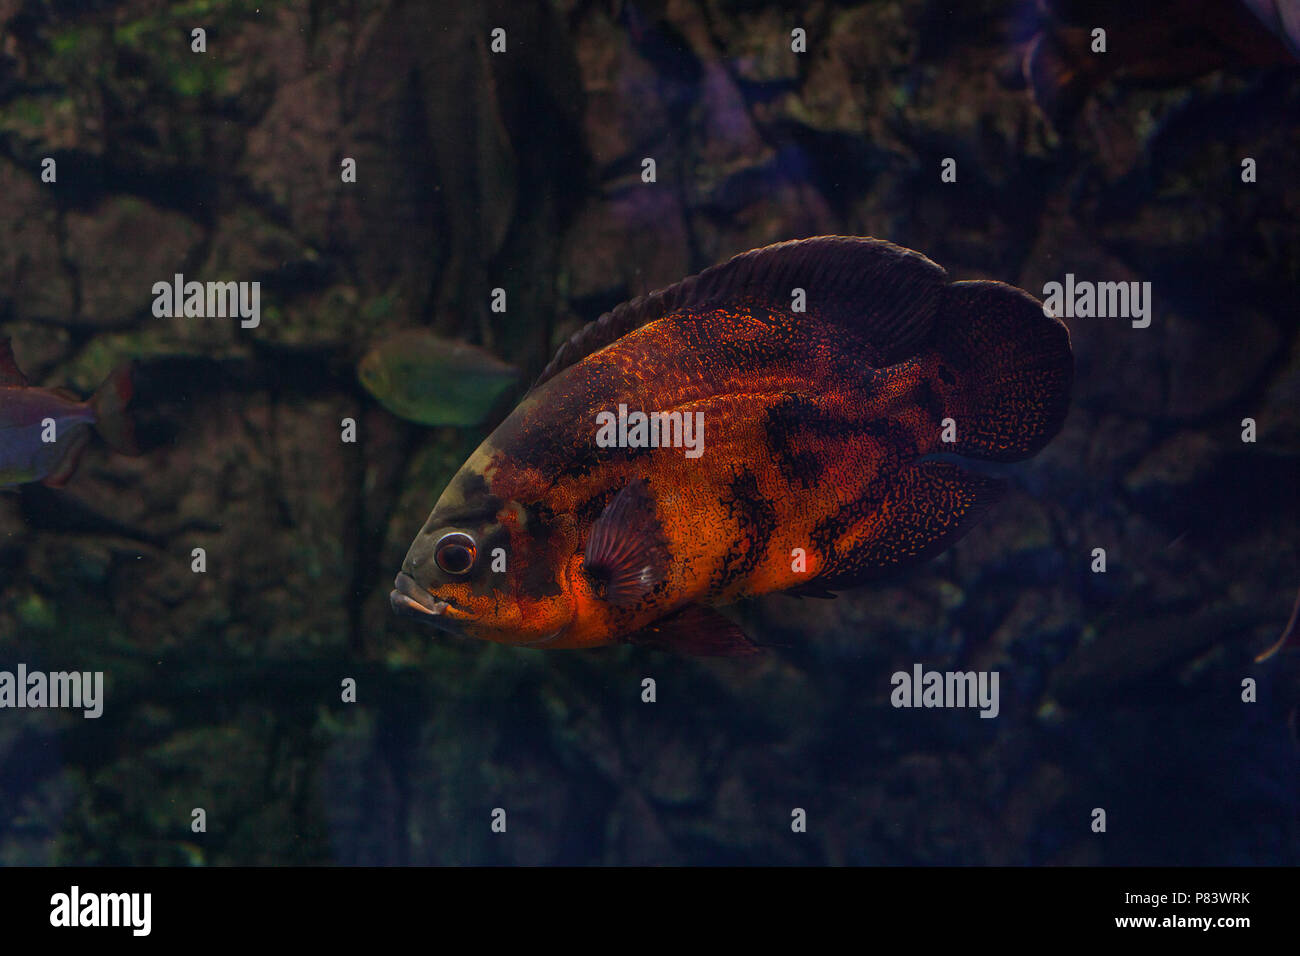 Astronotus floating under the water. Oscar fish Stock Photo